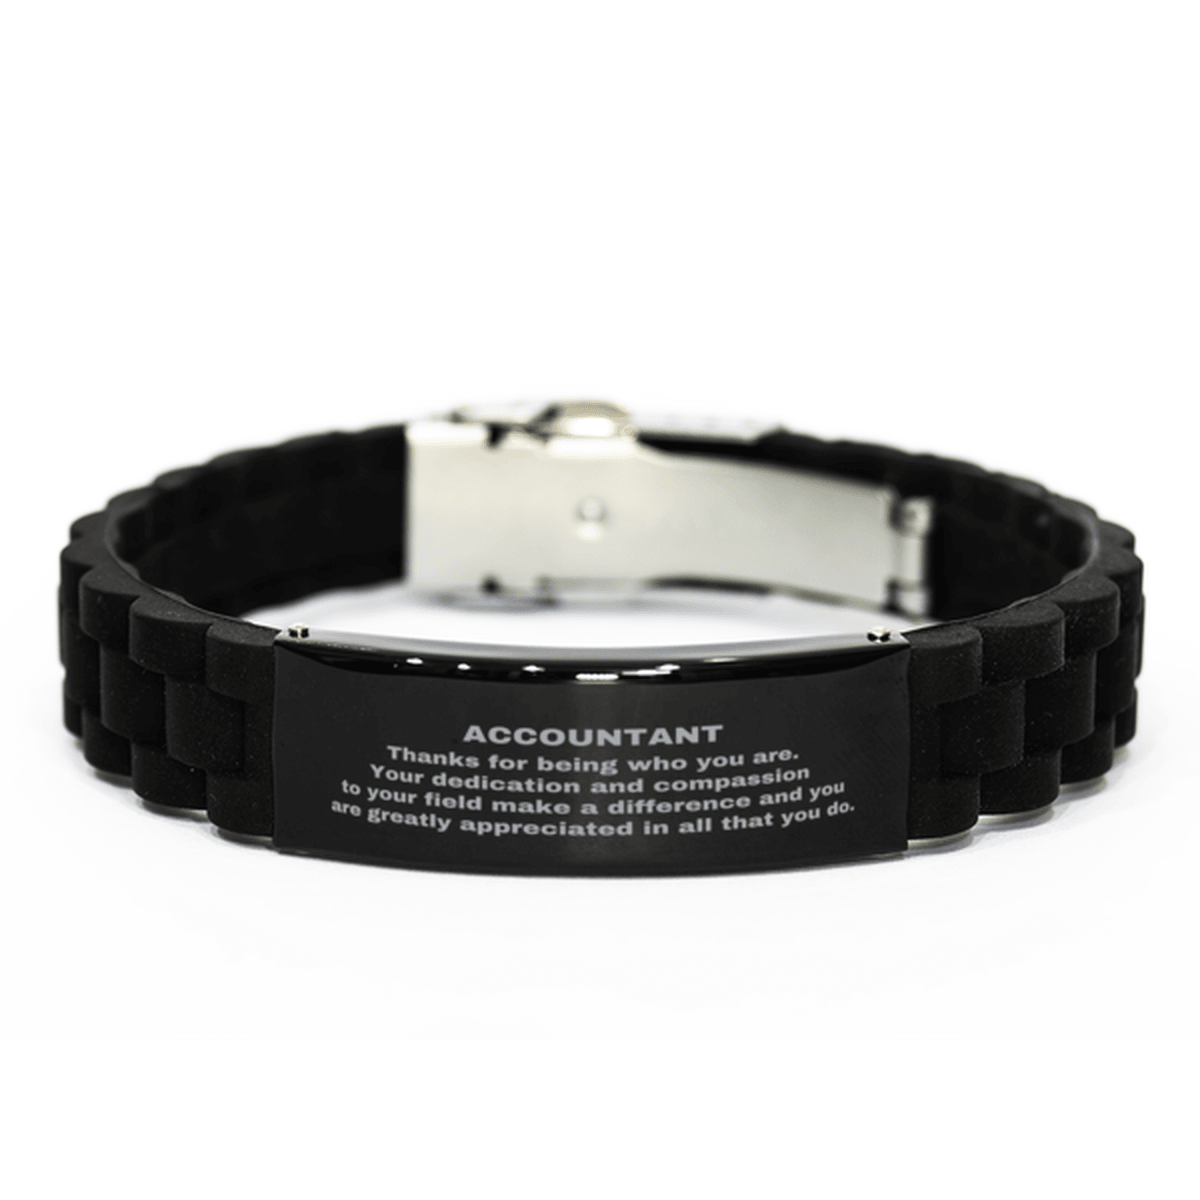 Accountant Black Glidelock Clasp Engraved Bracelet - Thanks for being who you are - Birthday Christmas Jewelry Gifts Coworkers Colleague Boss - Mallard Moon Gift Shop